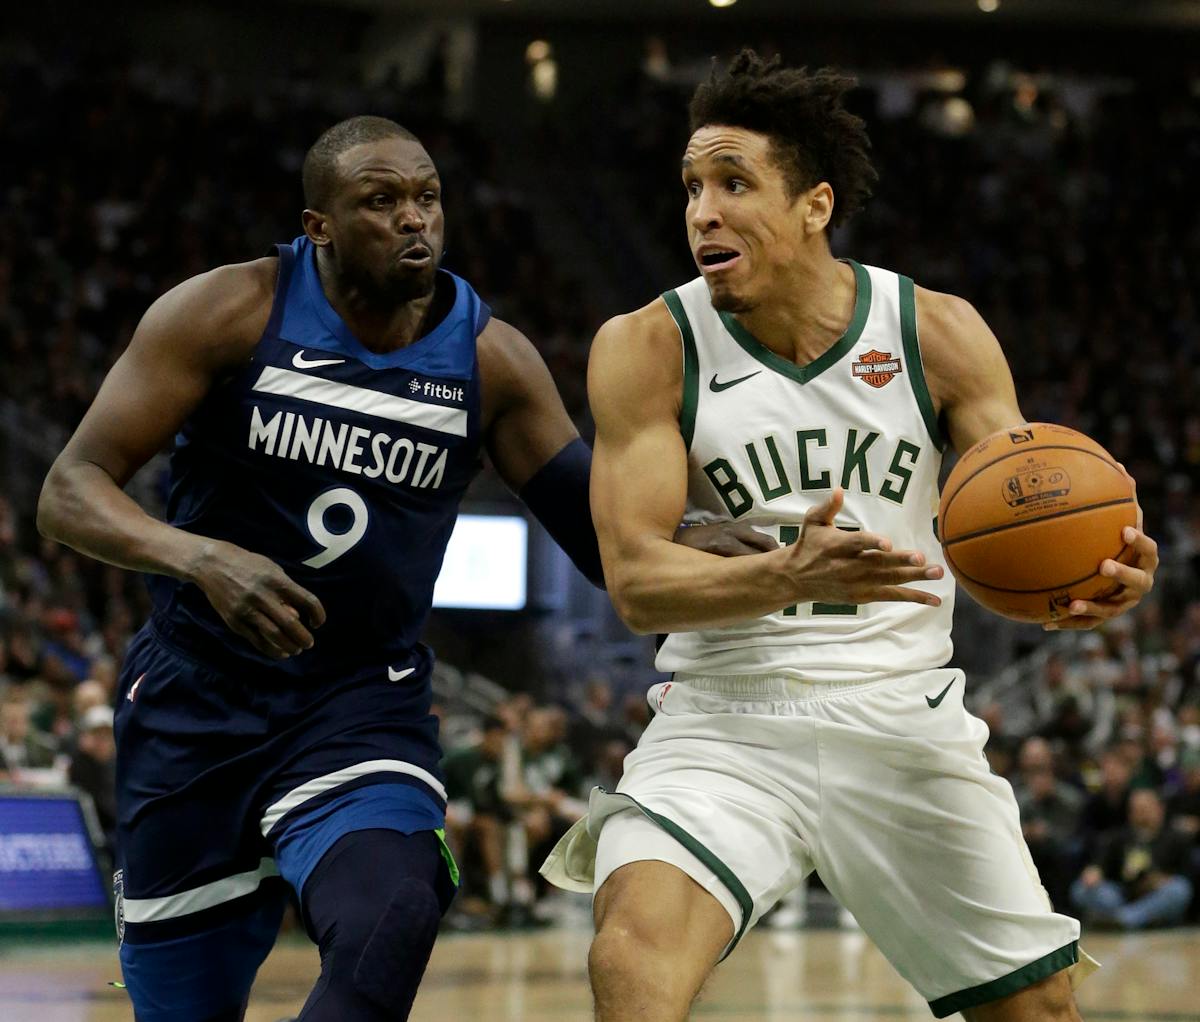 Milwaukee Bucks' Malcolm Brogdon, right, drives to the basket against Minnesota Timberwolves' Luol Deng (9) during the second half of an NBA basketbal